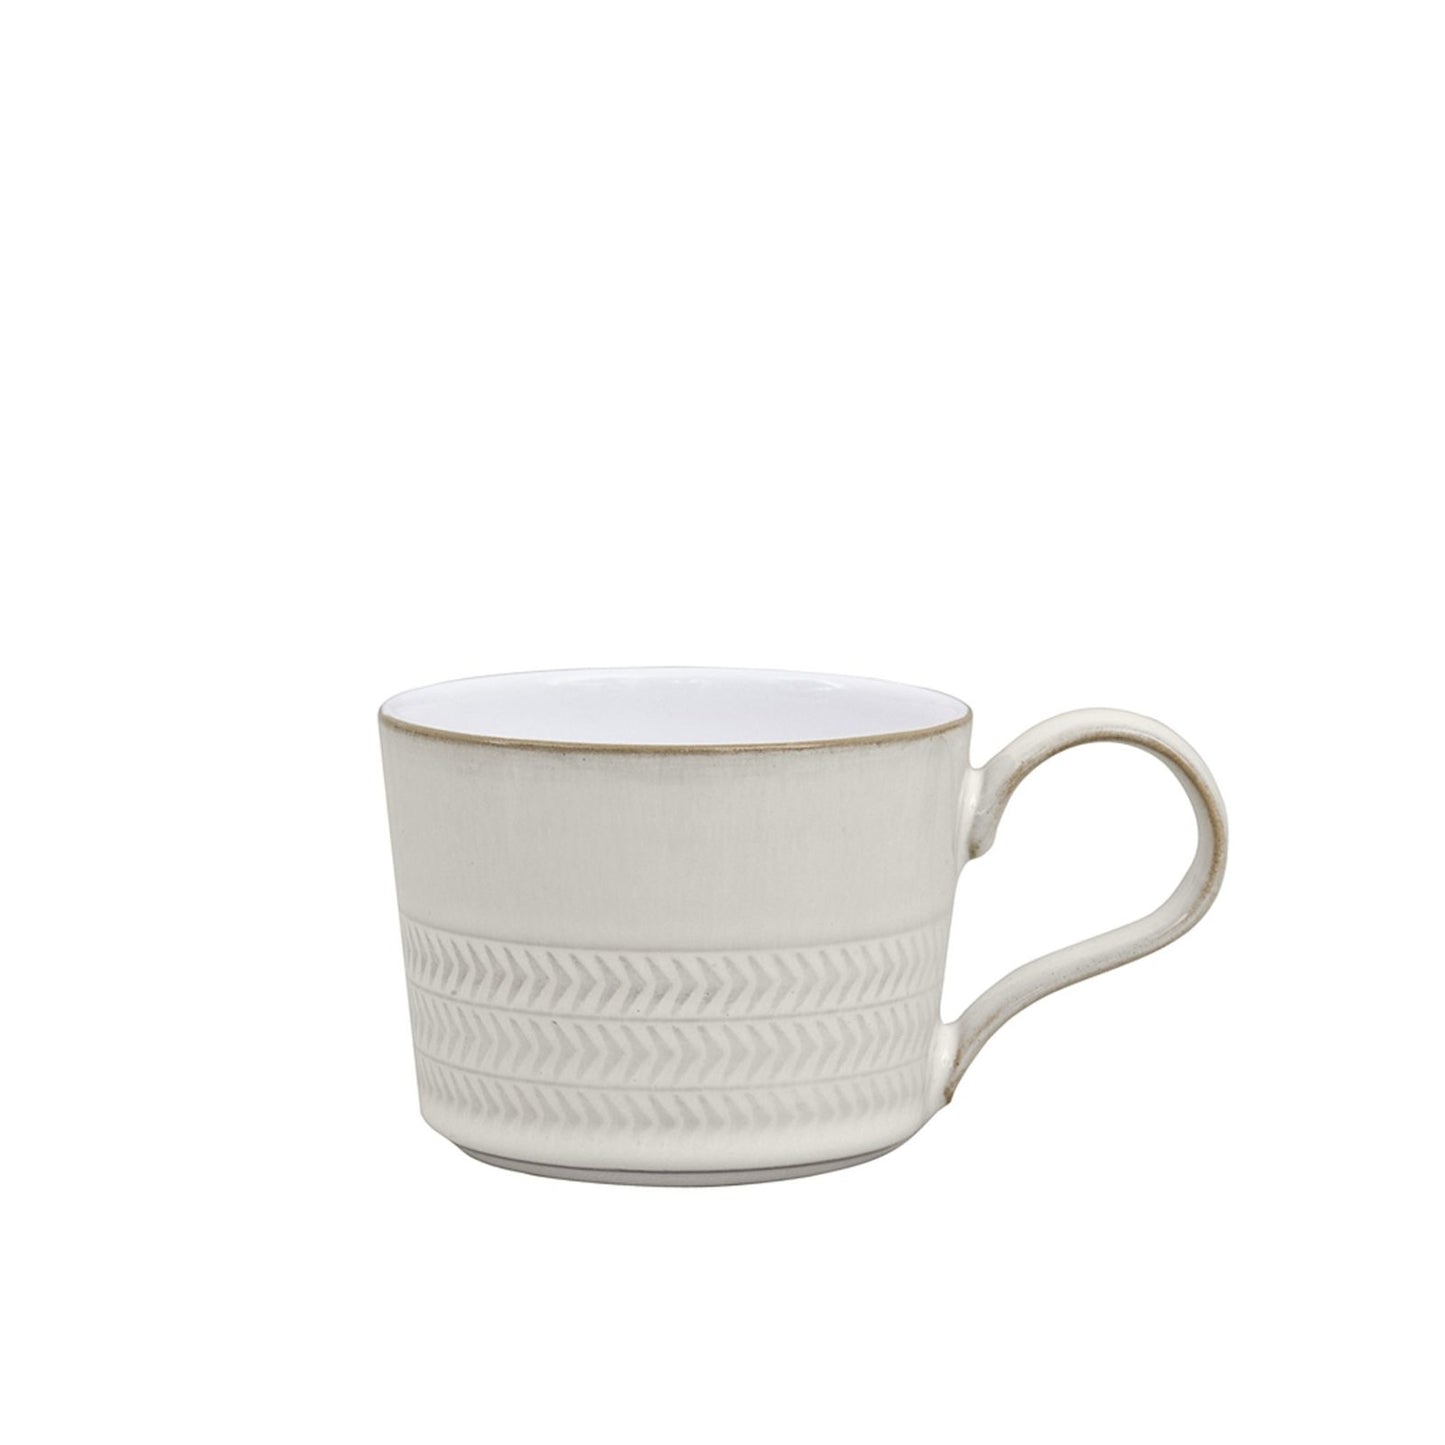 Natural Canvas Textured Tea/Coffee Cup